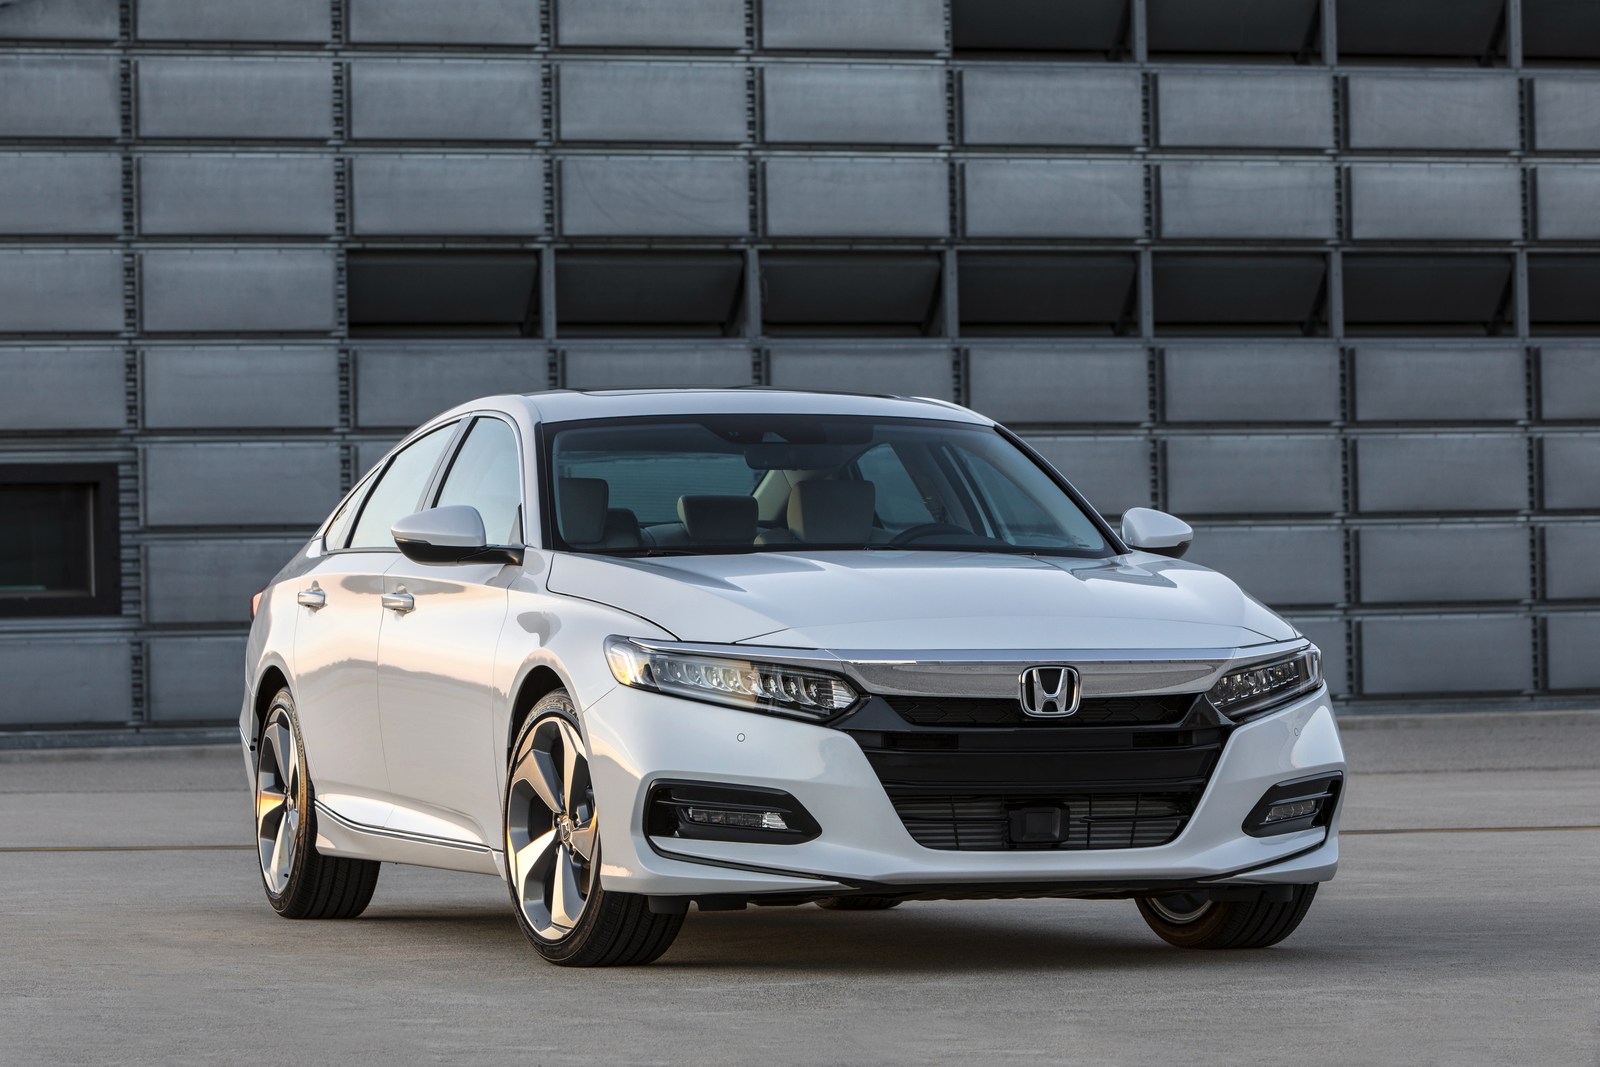 2018 Honda Accord Goes Official with 1.5 and 2.0 Turbo Engines